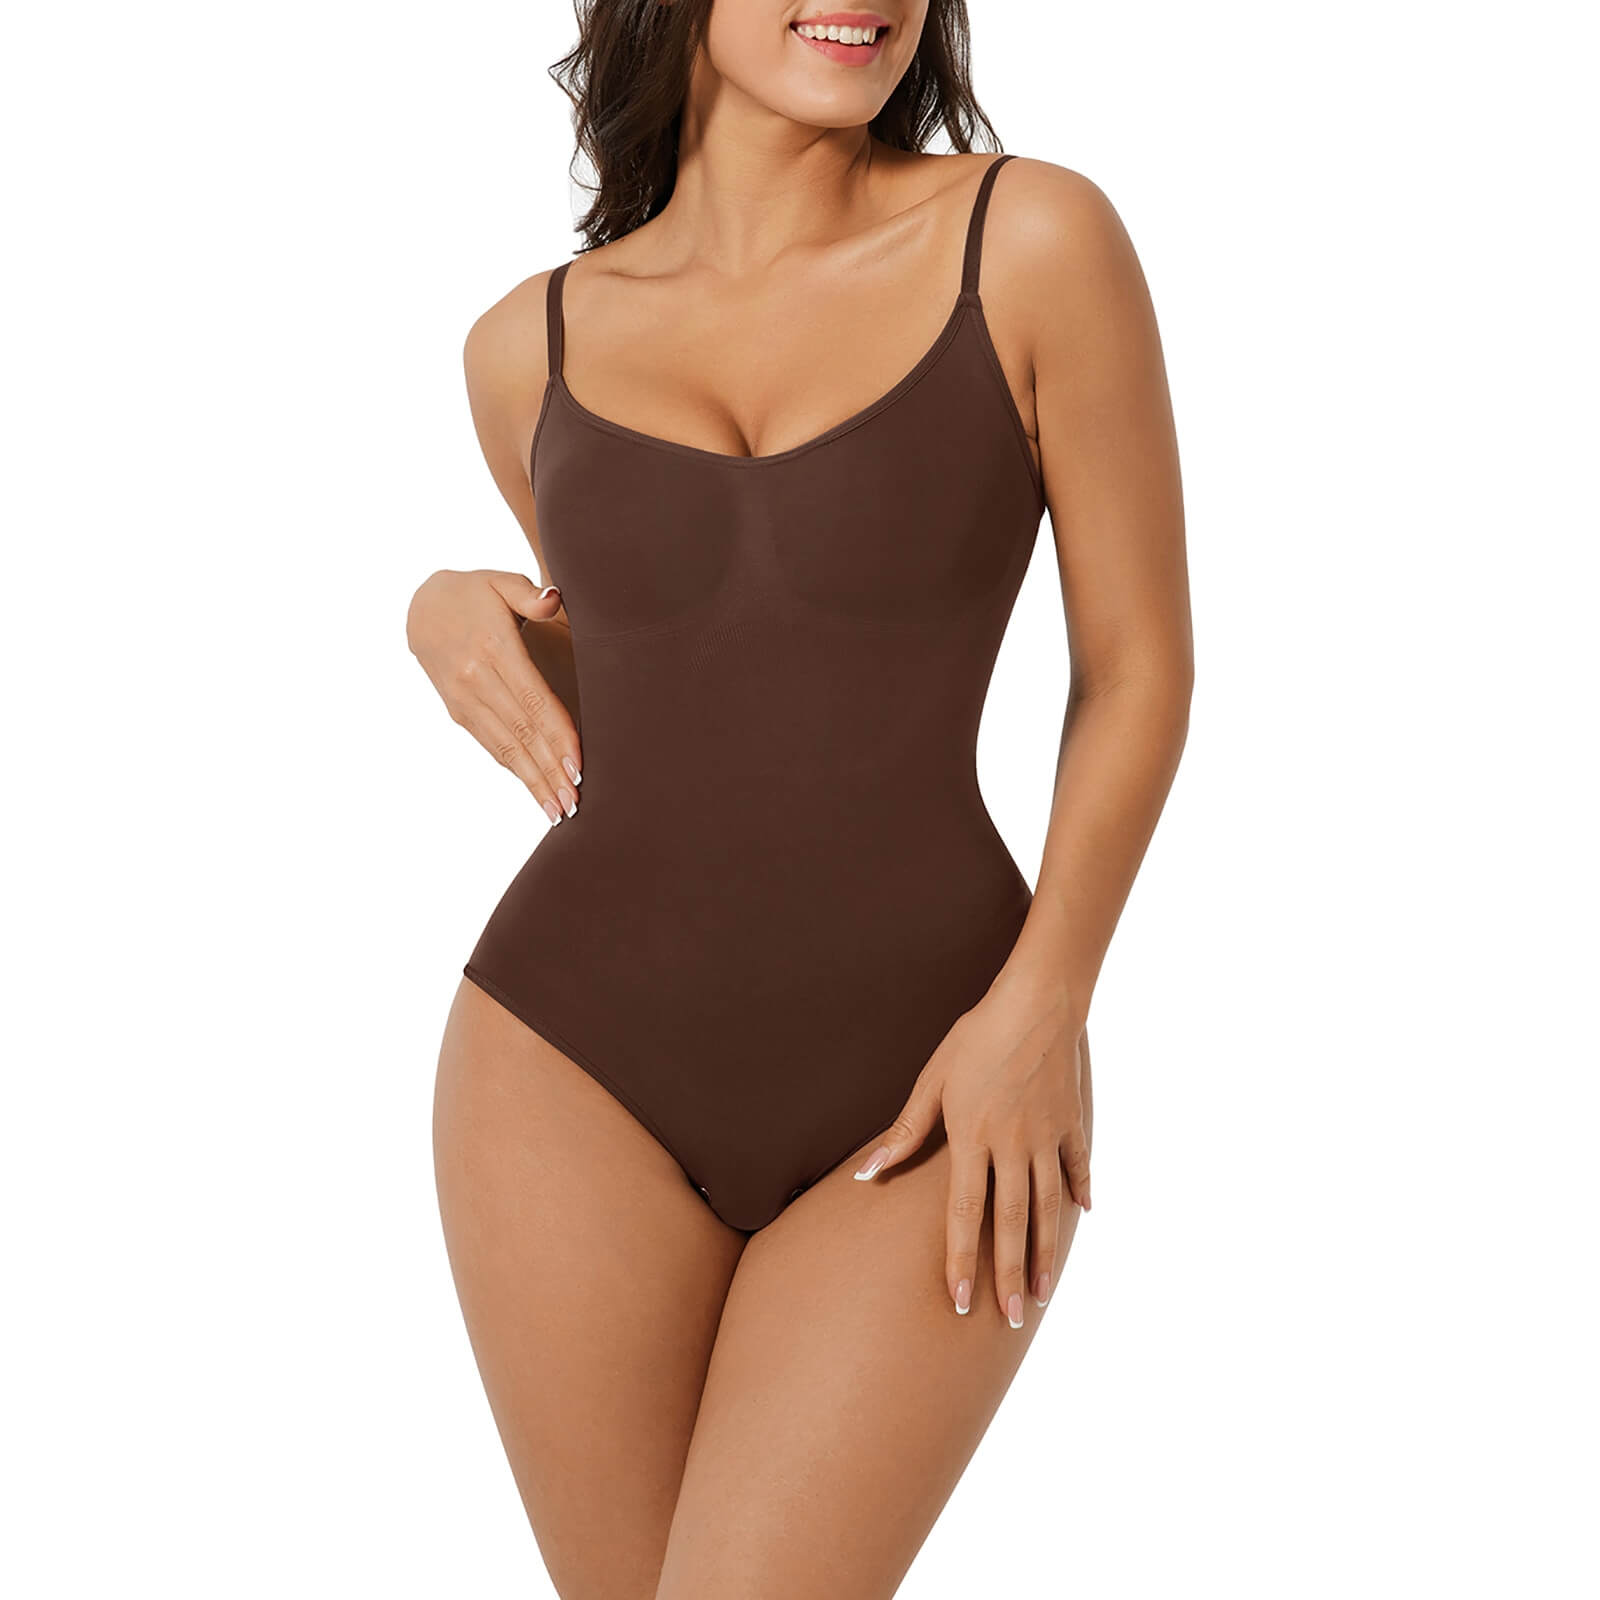 s snatching bodysuits take two inches off your waist, the